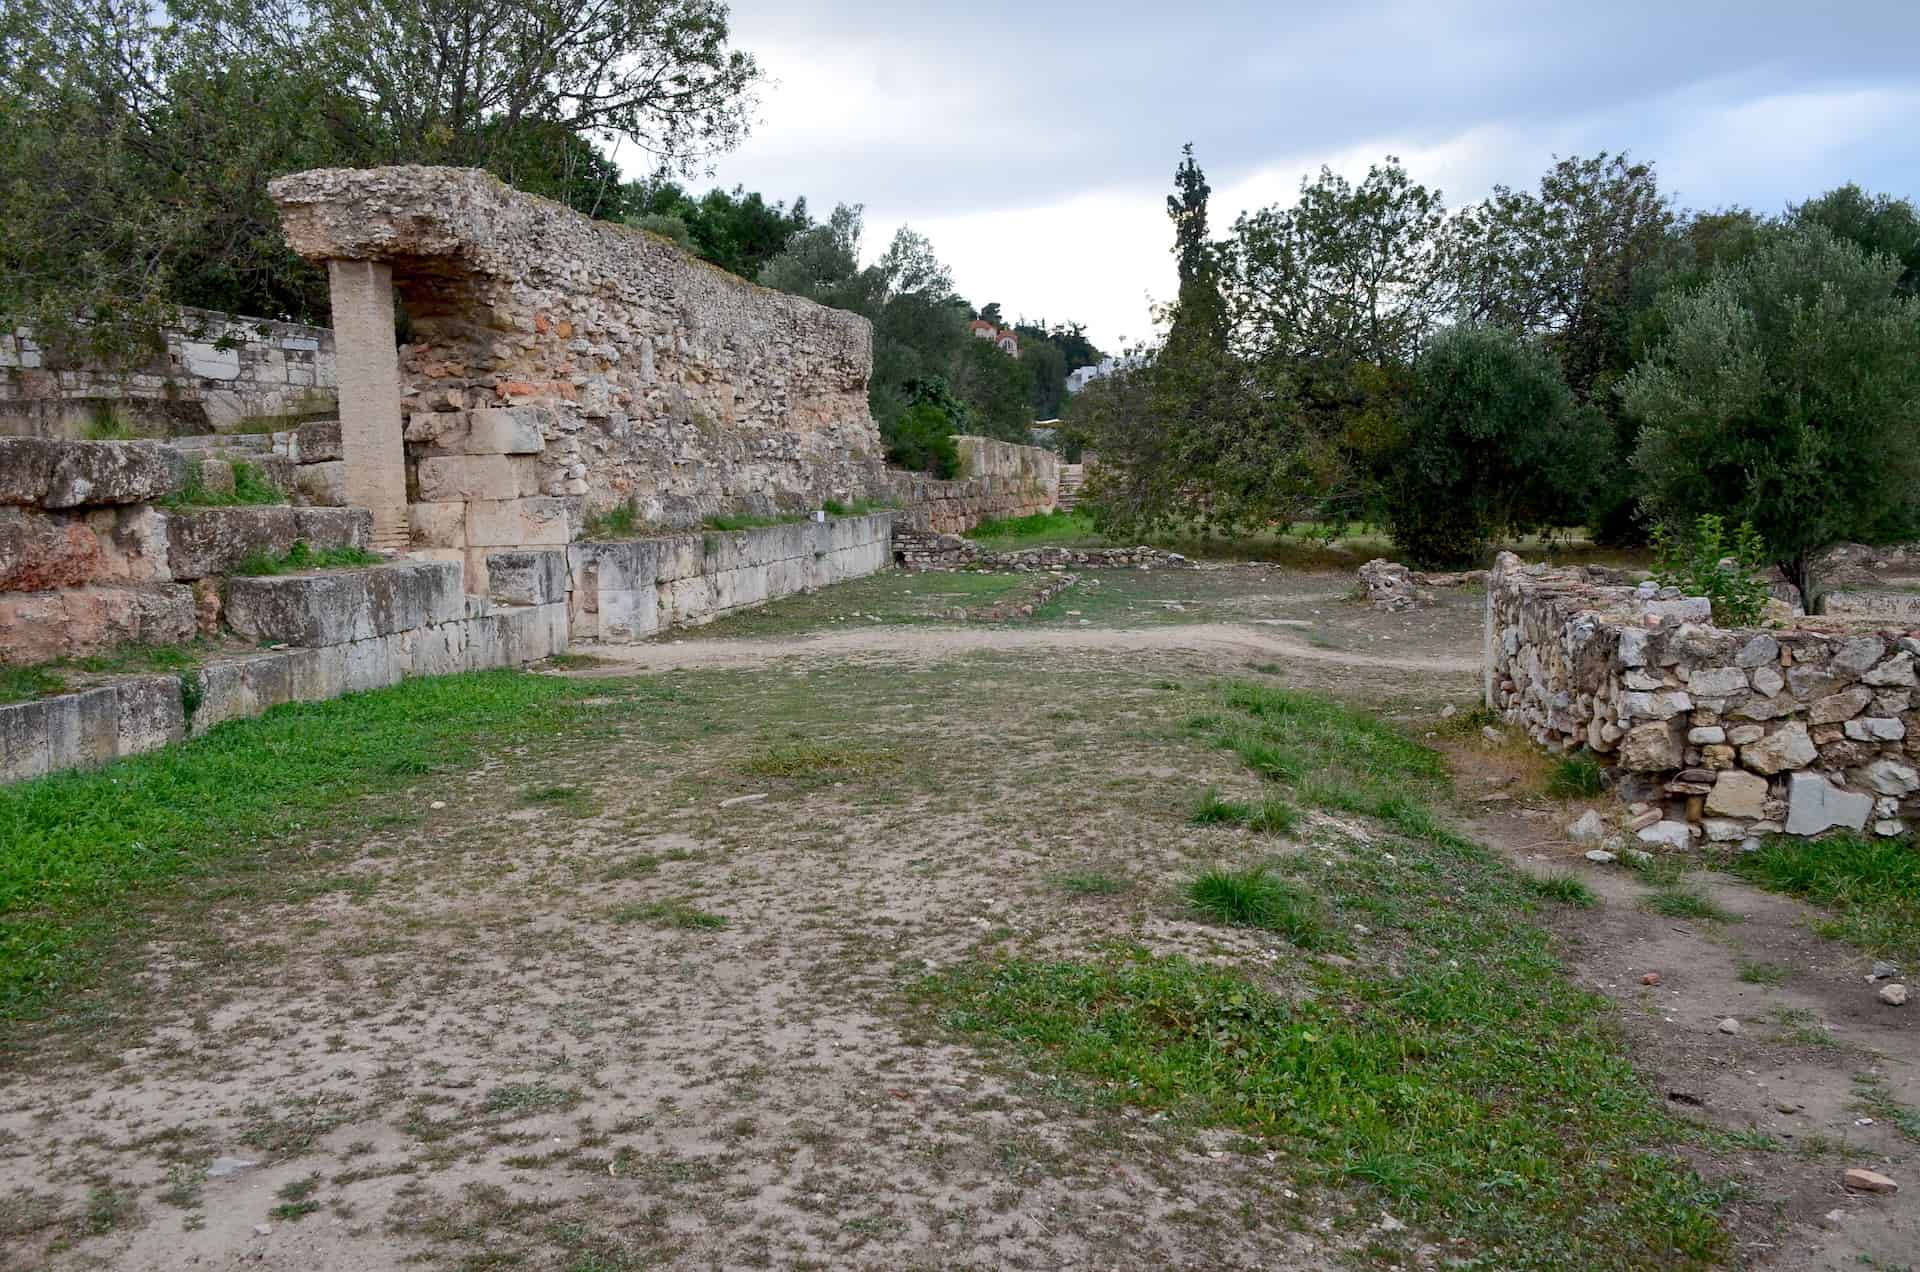 Area occupied by South Stoa II